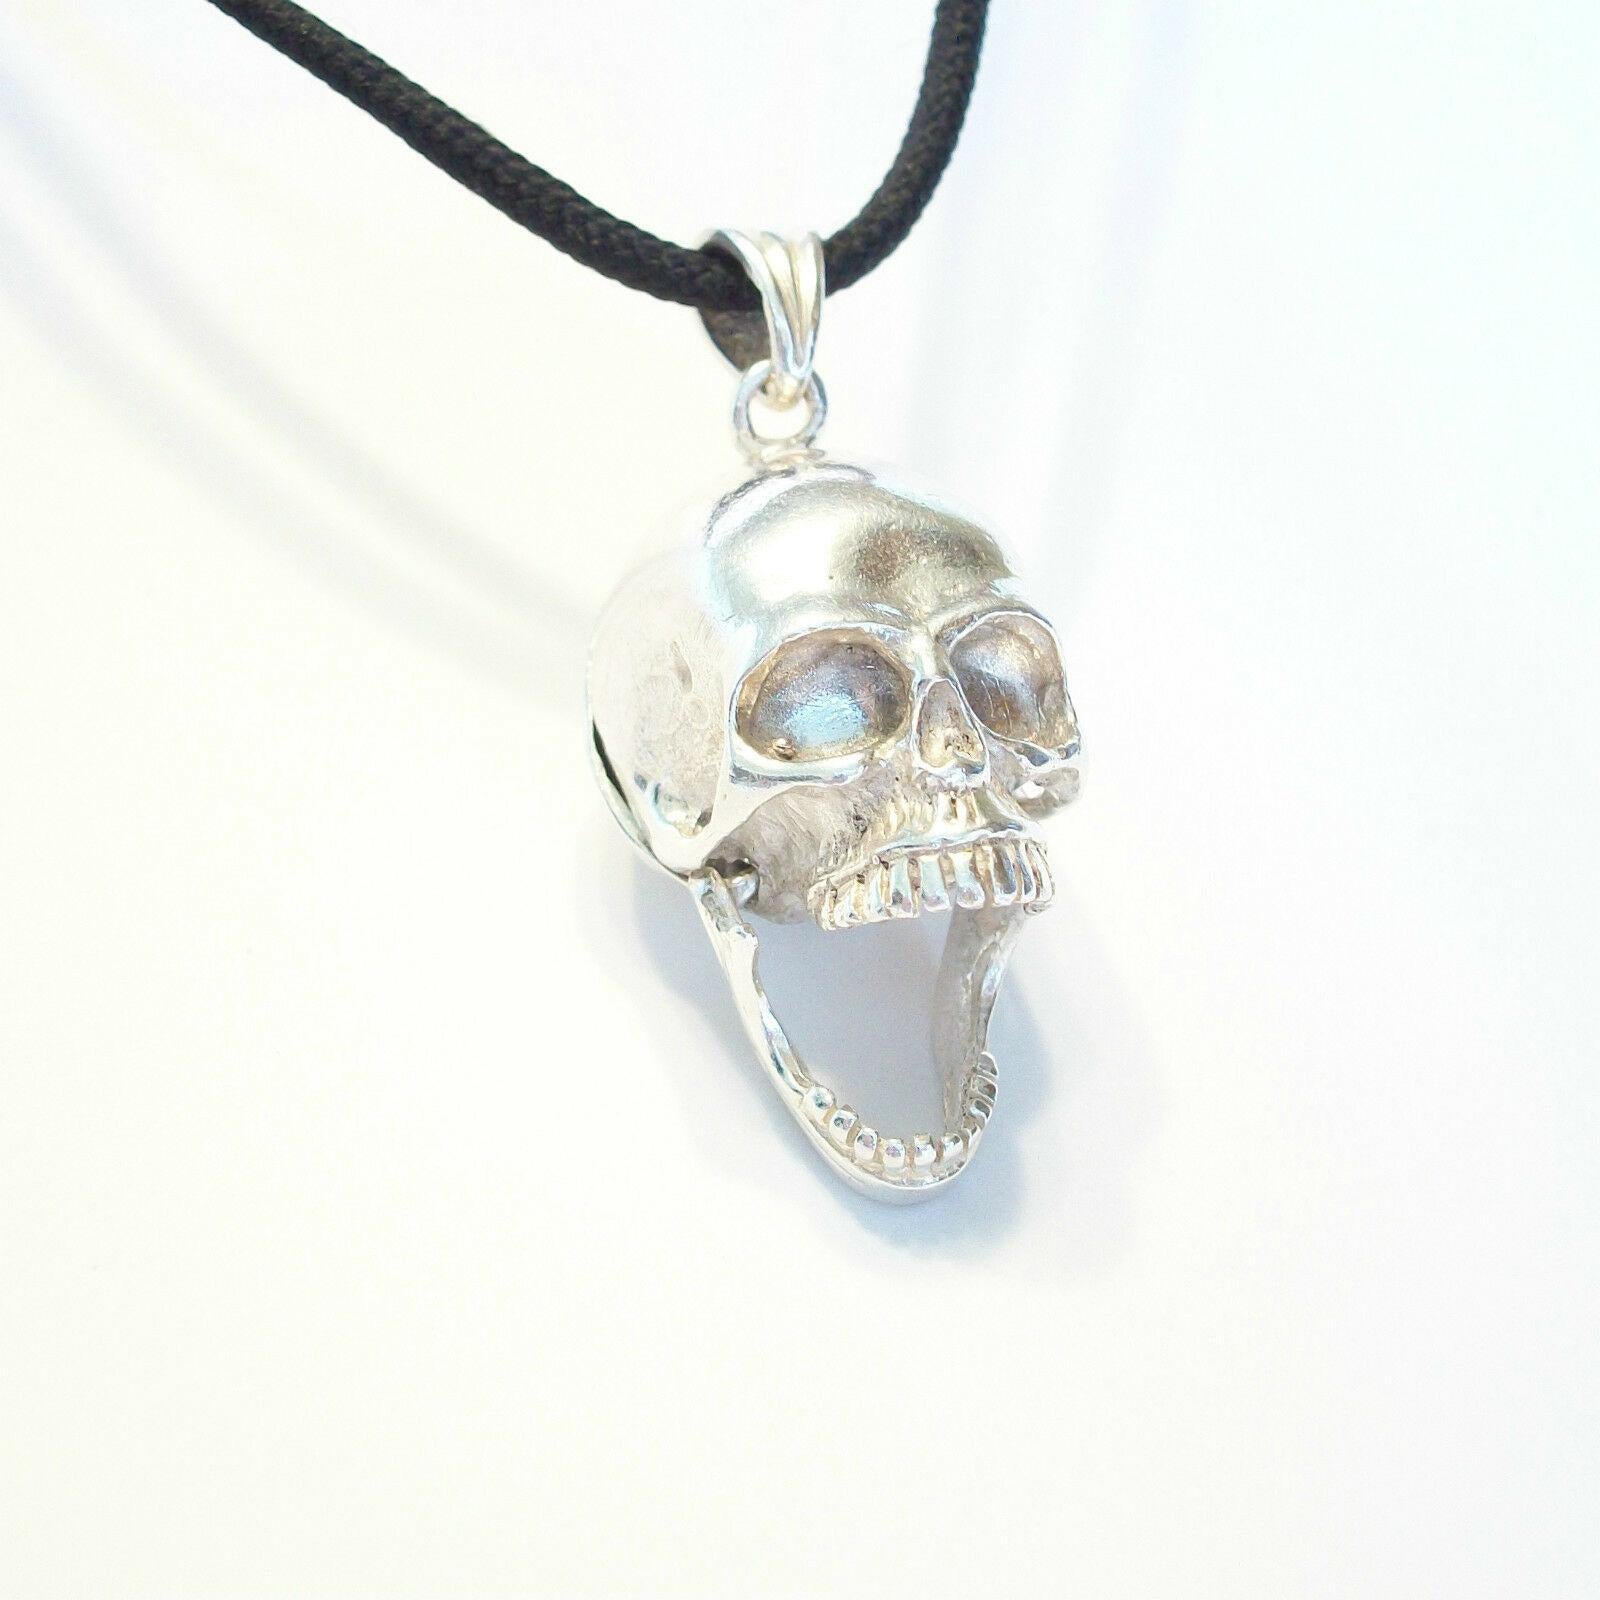 Vintage sterling silver skull pendant with hinged jaw and secret compartment - unsigned  - country of origin unkown - late 20th century.

Excellent vintage condition - no loss - no damage - no repairs - minor tarnishing & fine surface scratches with